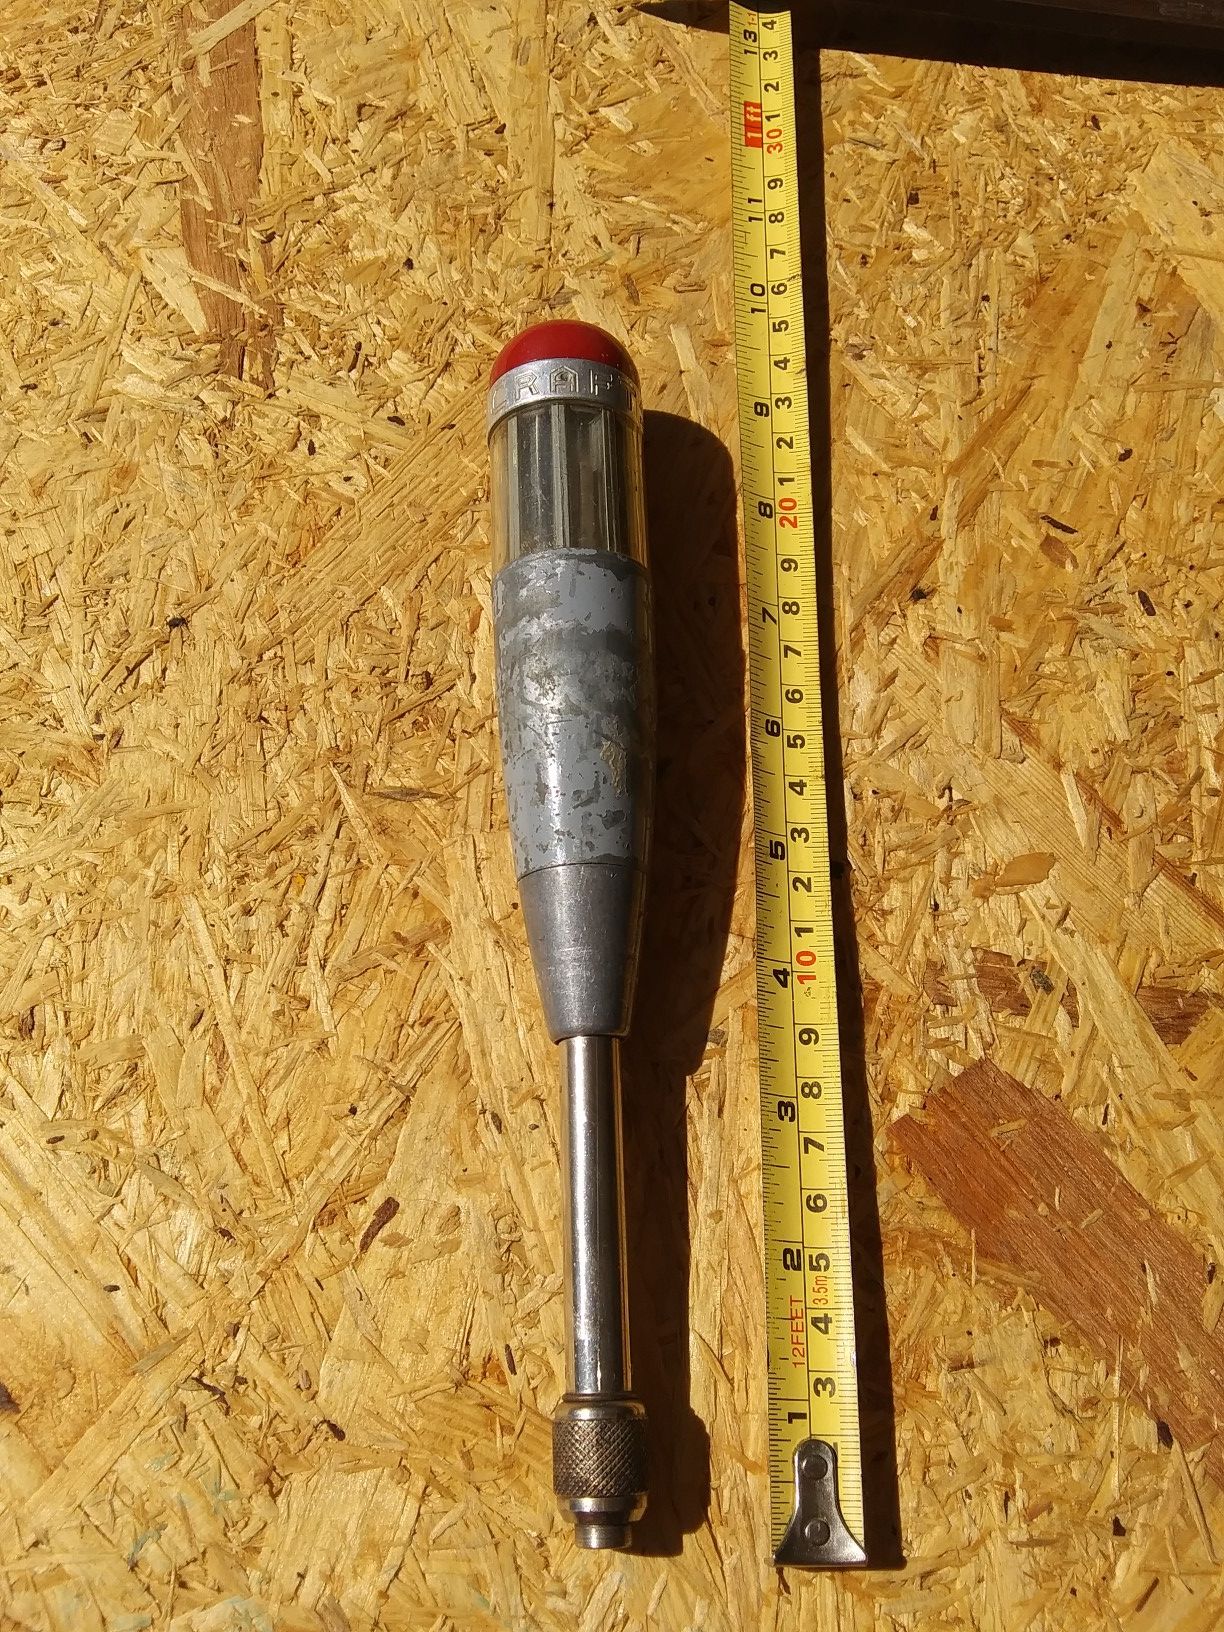 Vintage Sears Craftsman Push Drill. Excellent Condition with Bits.